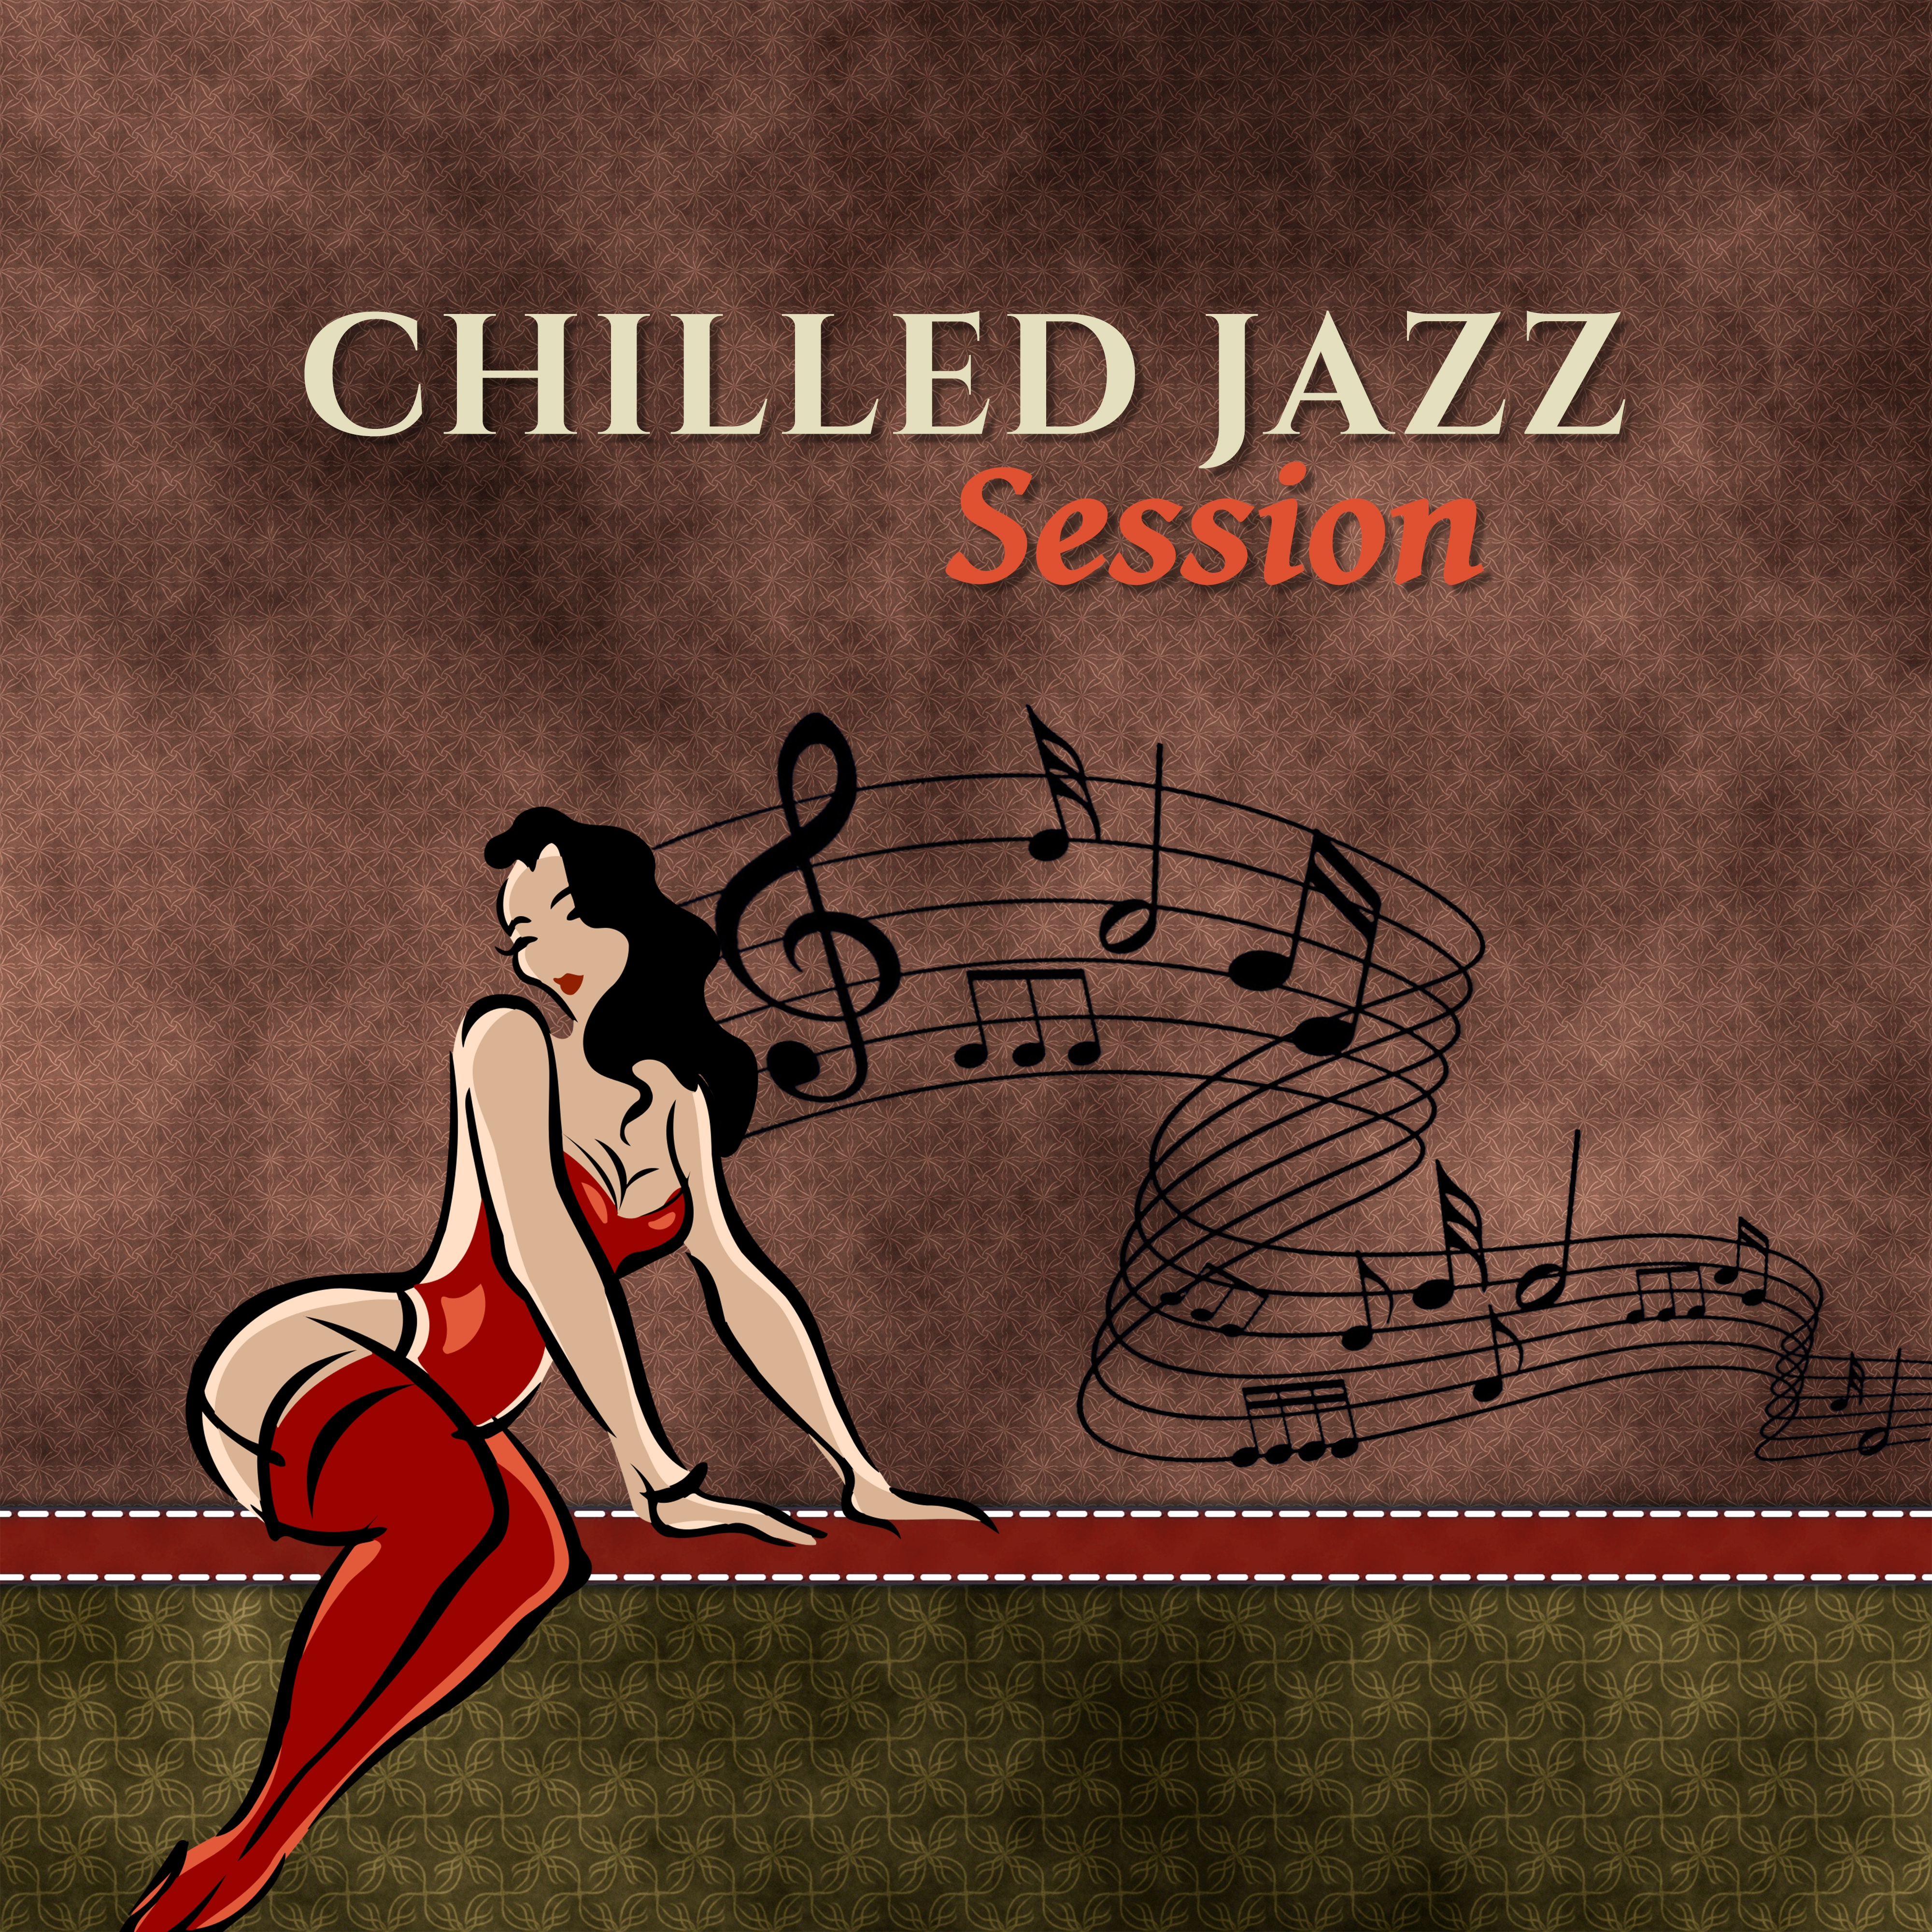 Chilled Jazz Session – Relaxing Jazz Music, Mellow Sounds of Jazz Instrumental, Easy Listening, Piano Note